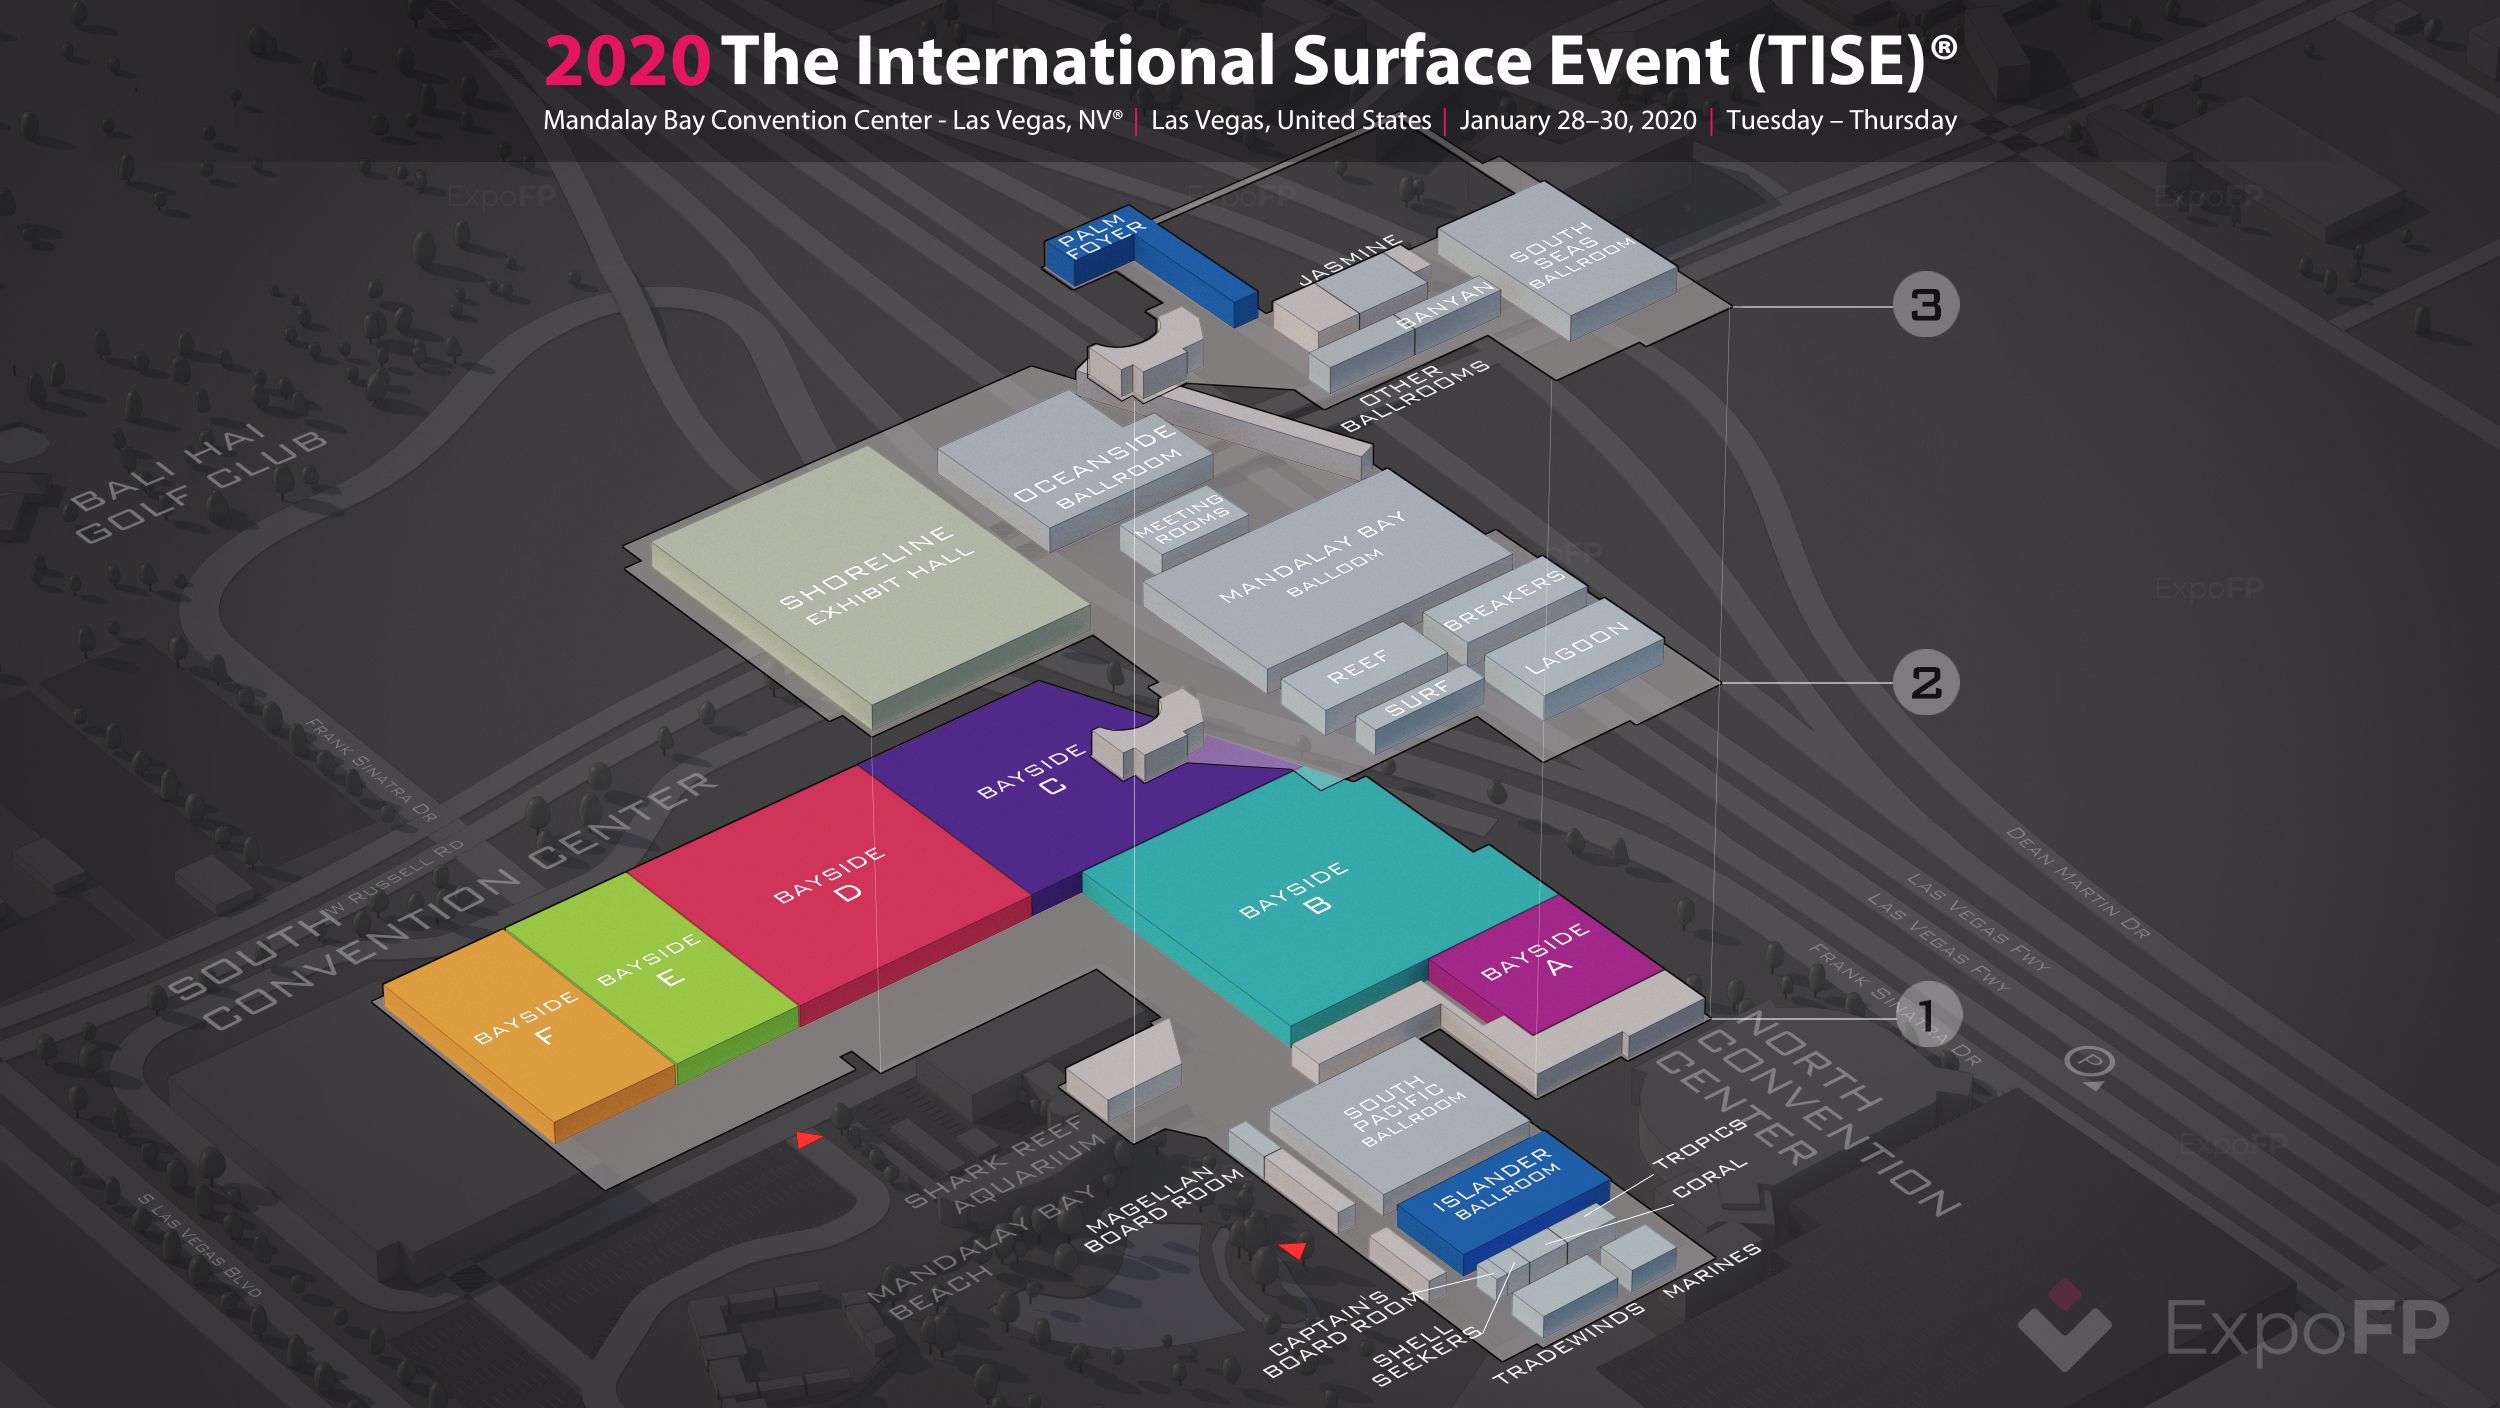 The International Surface Event (TISE) 2020 in Mandalay